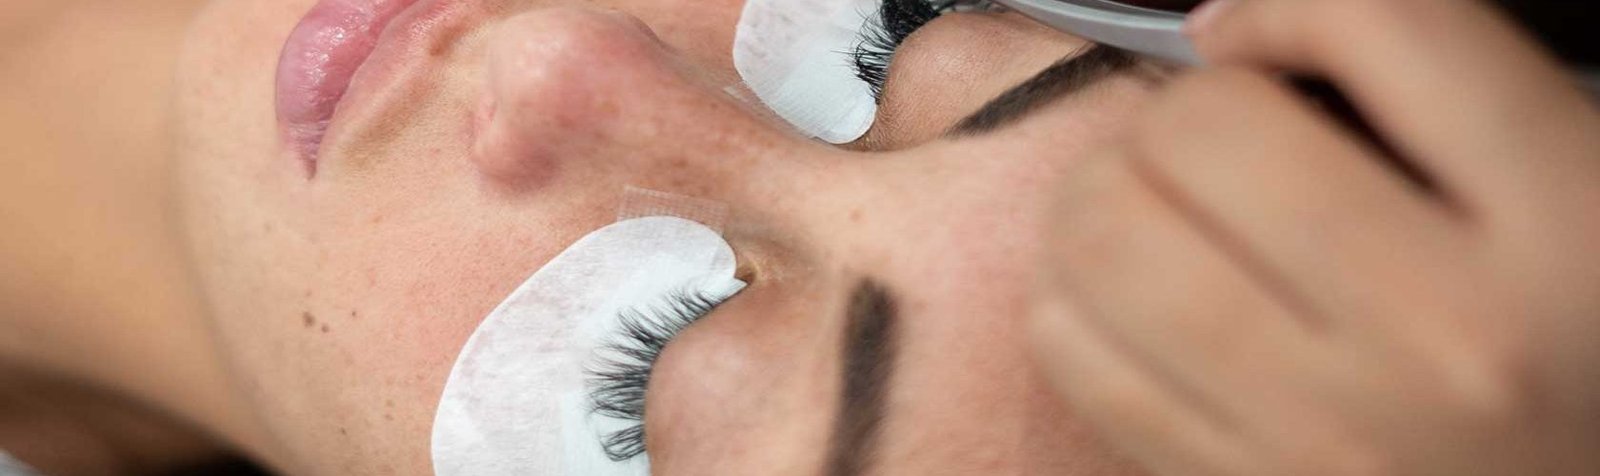 PERMANENT EYE MAKEUP OPTIONS FOR THE BUSY YOU